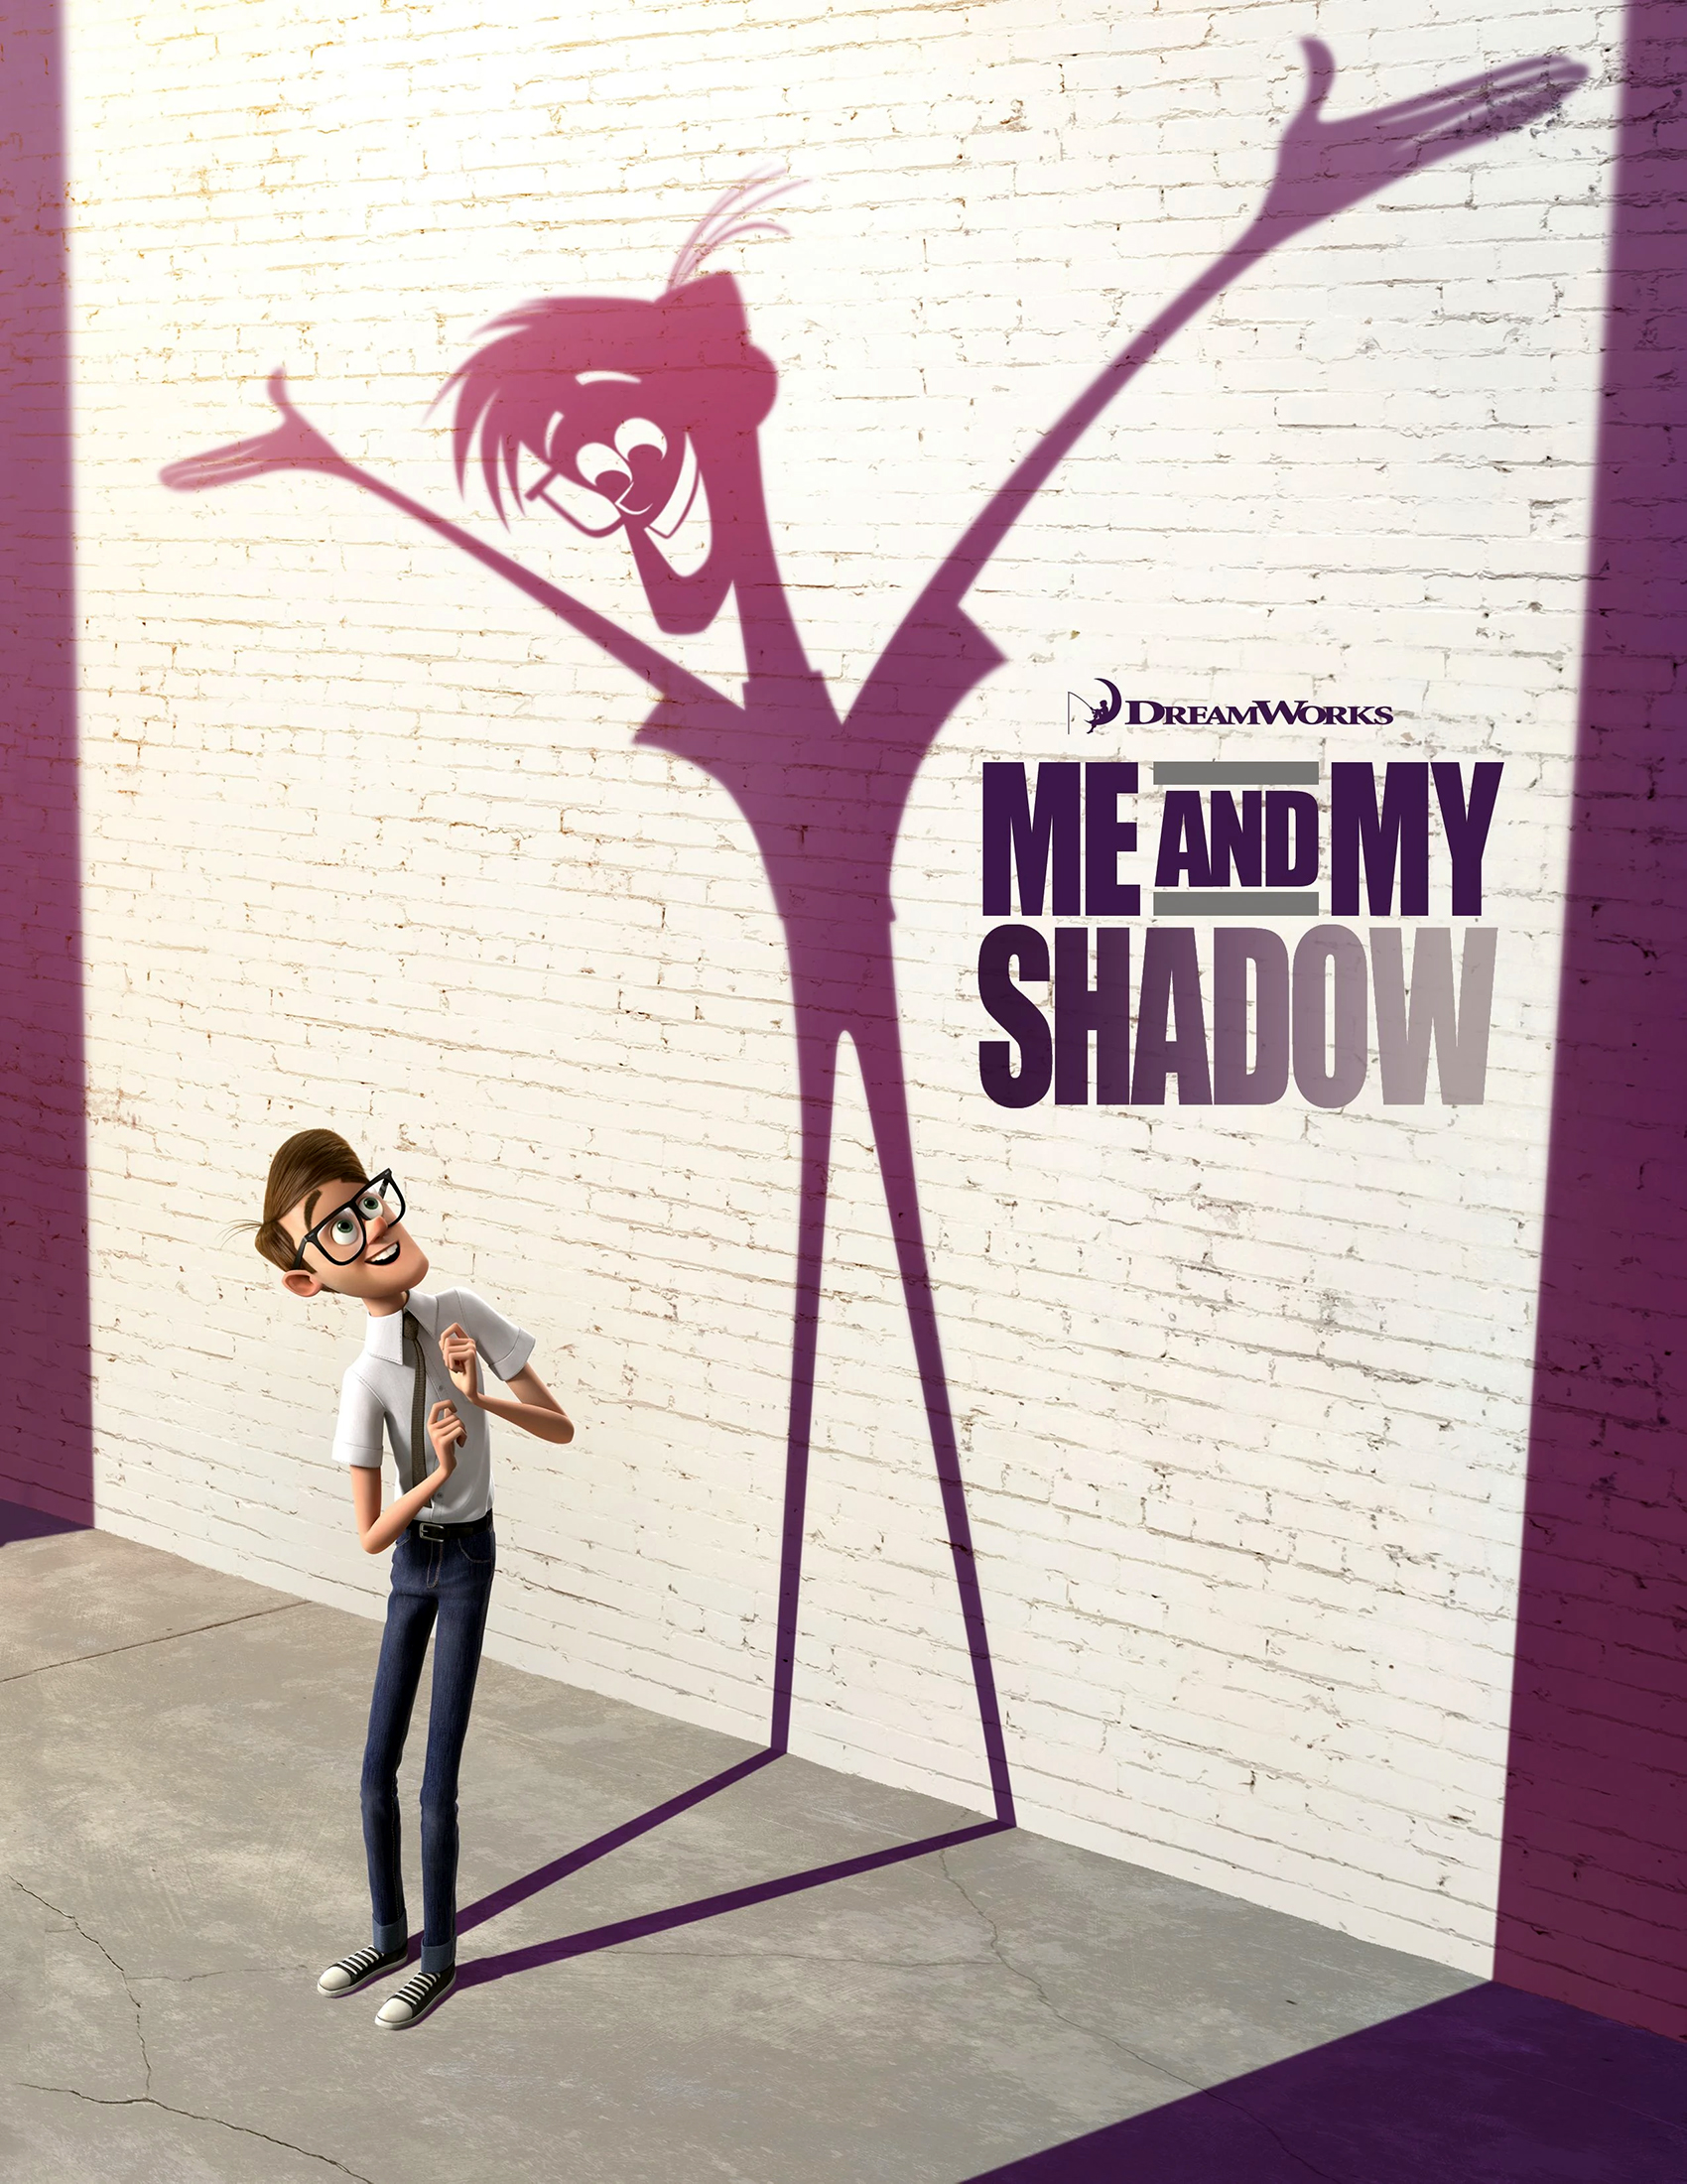 Me and My Shadow (partially found footage of unreleased DreamWorks animated film; 2010-2017) - Me and My Shadow (partially found footage of unreleased DreamWorks animated film; 2010-2017)